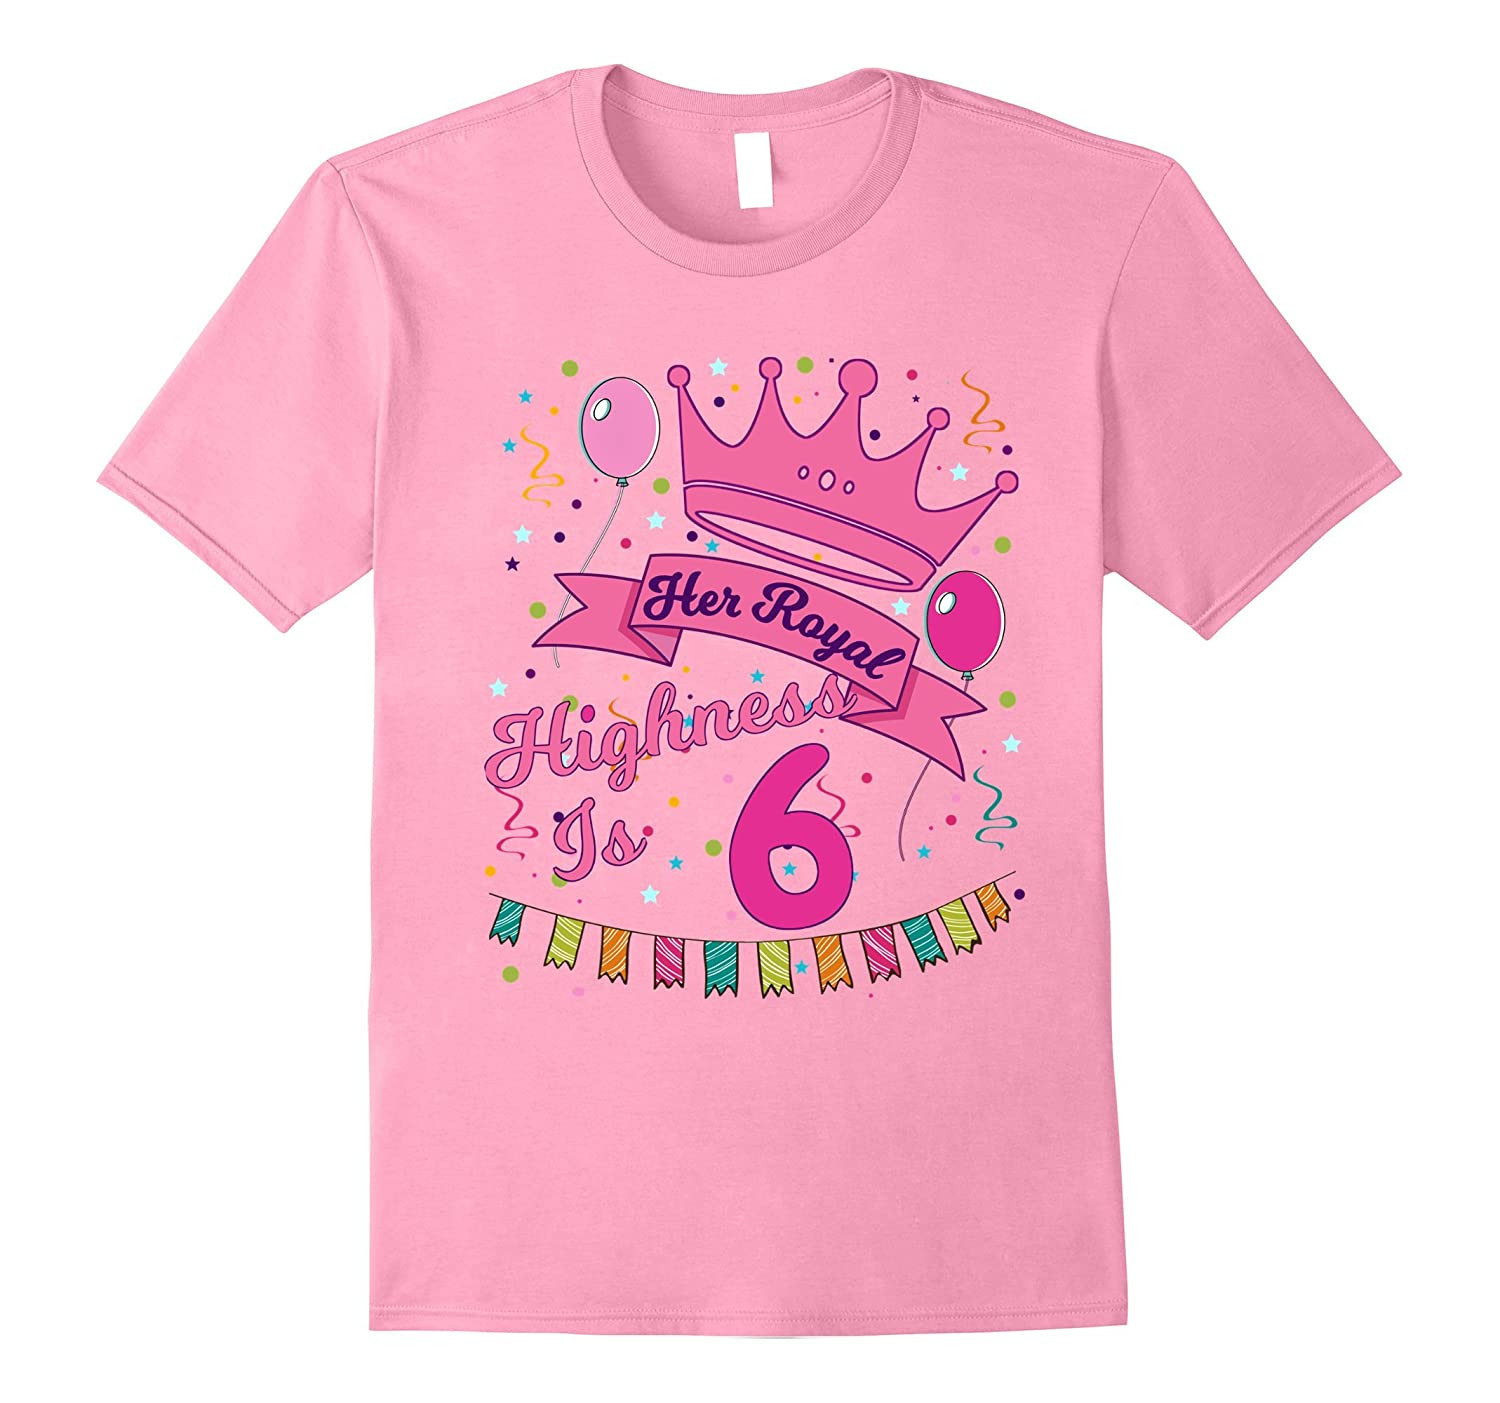 6 Year Old Birthday Gift
 Kids Her Royal Highness 6 Year Old Girl Birthday Gift